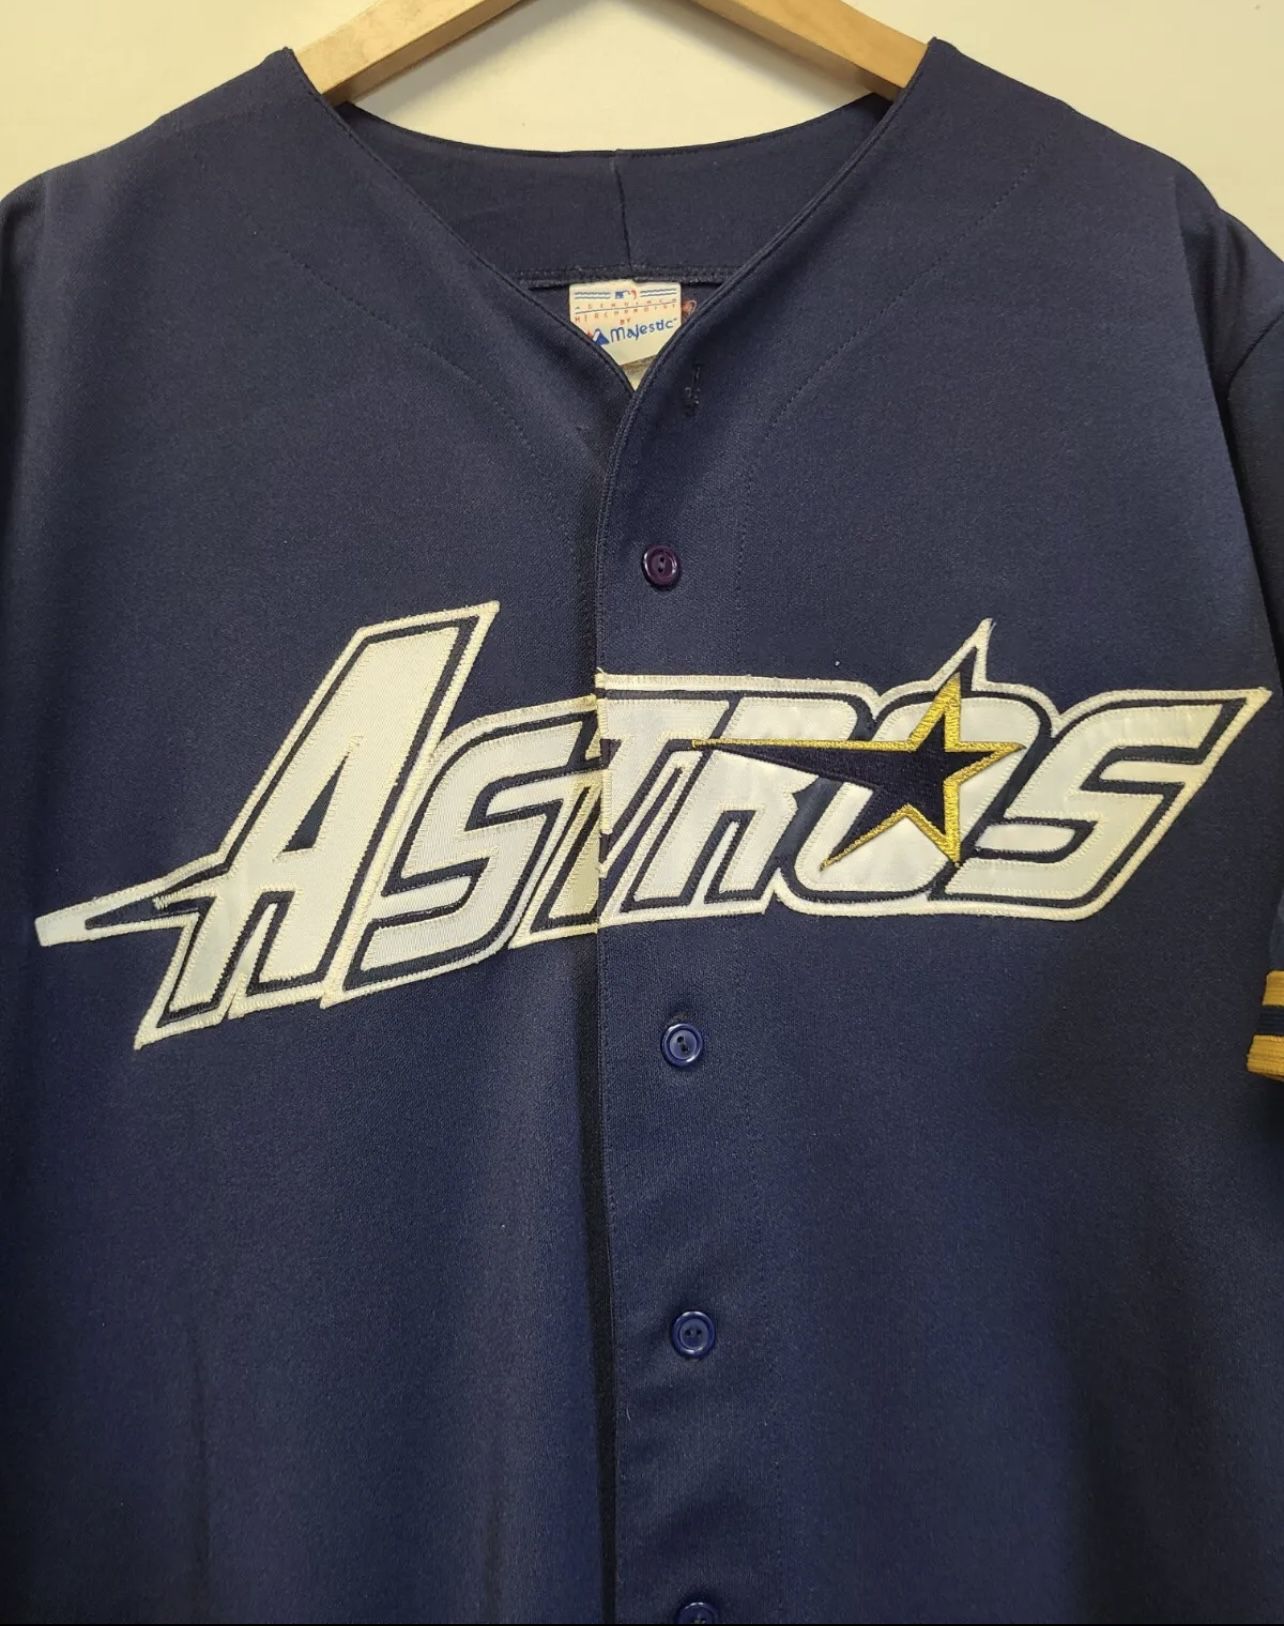 ASTROS Bagwell Jersey for Sale in Pasadena, TX - OfferUp